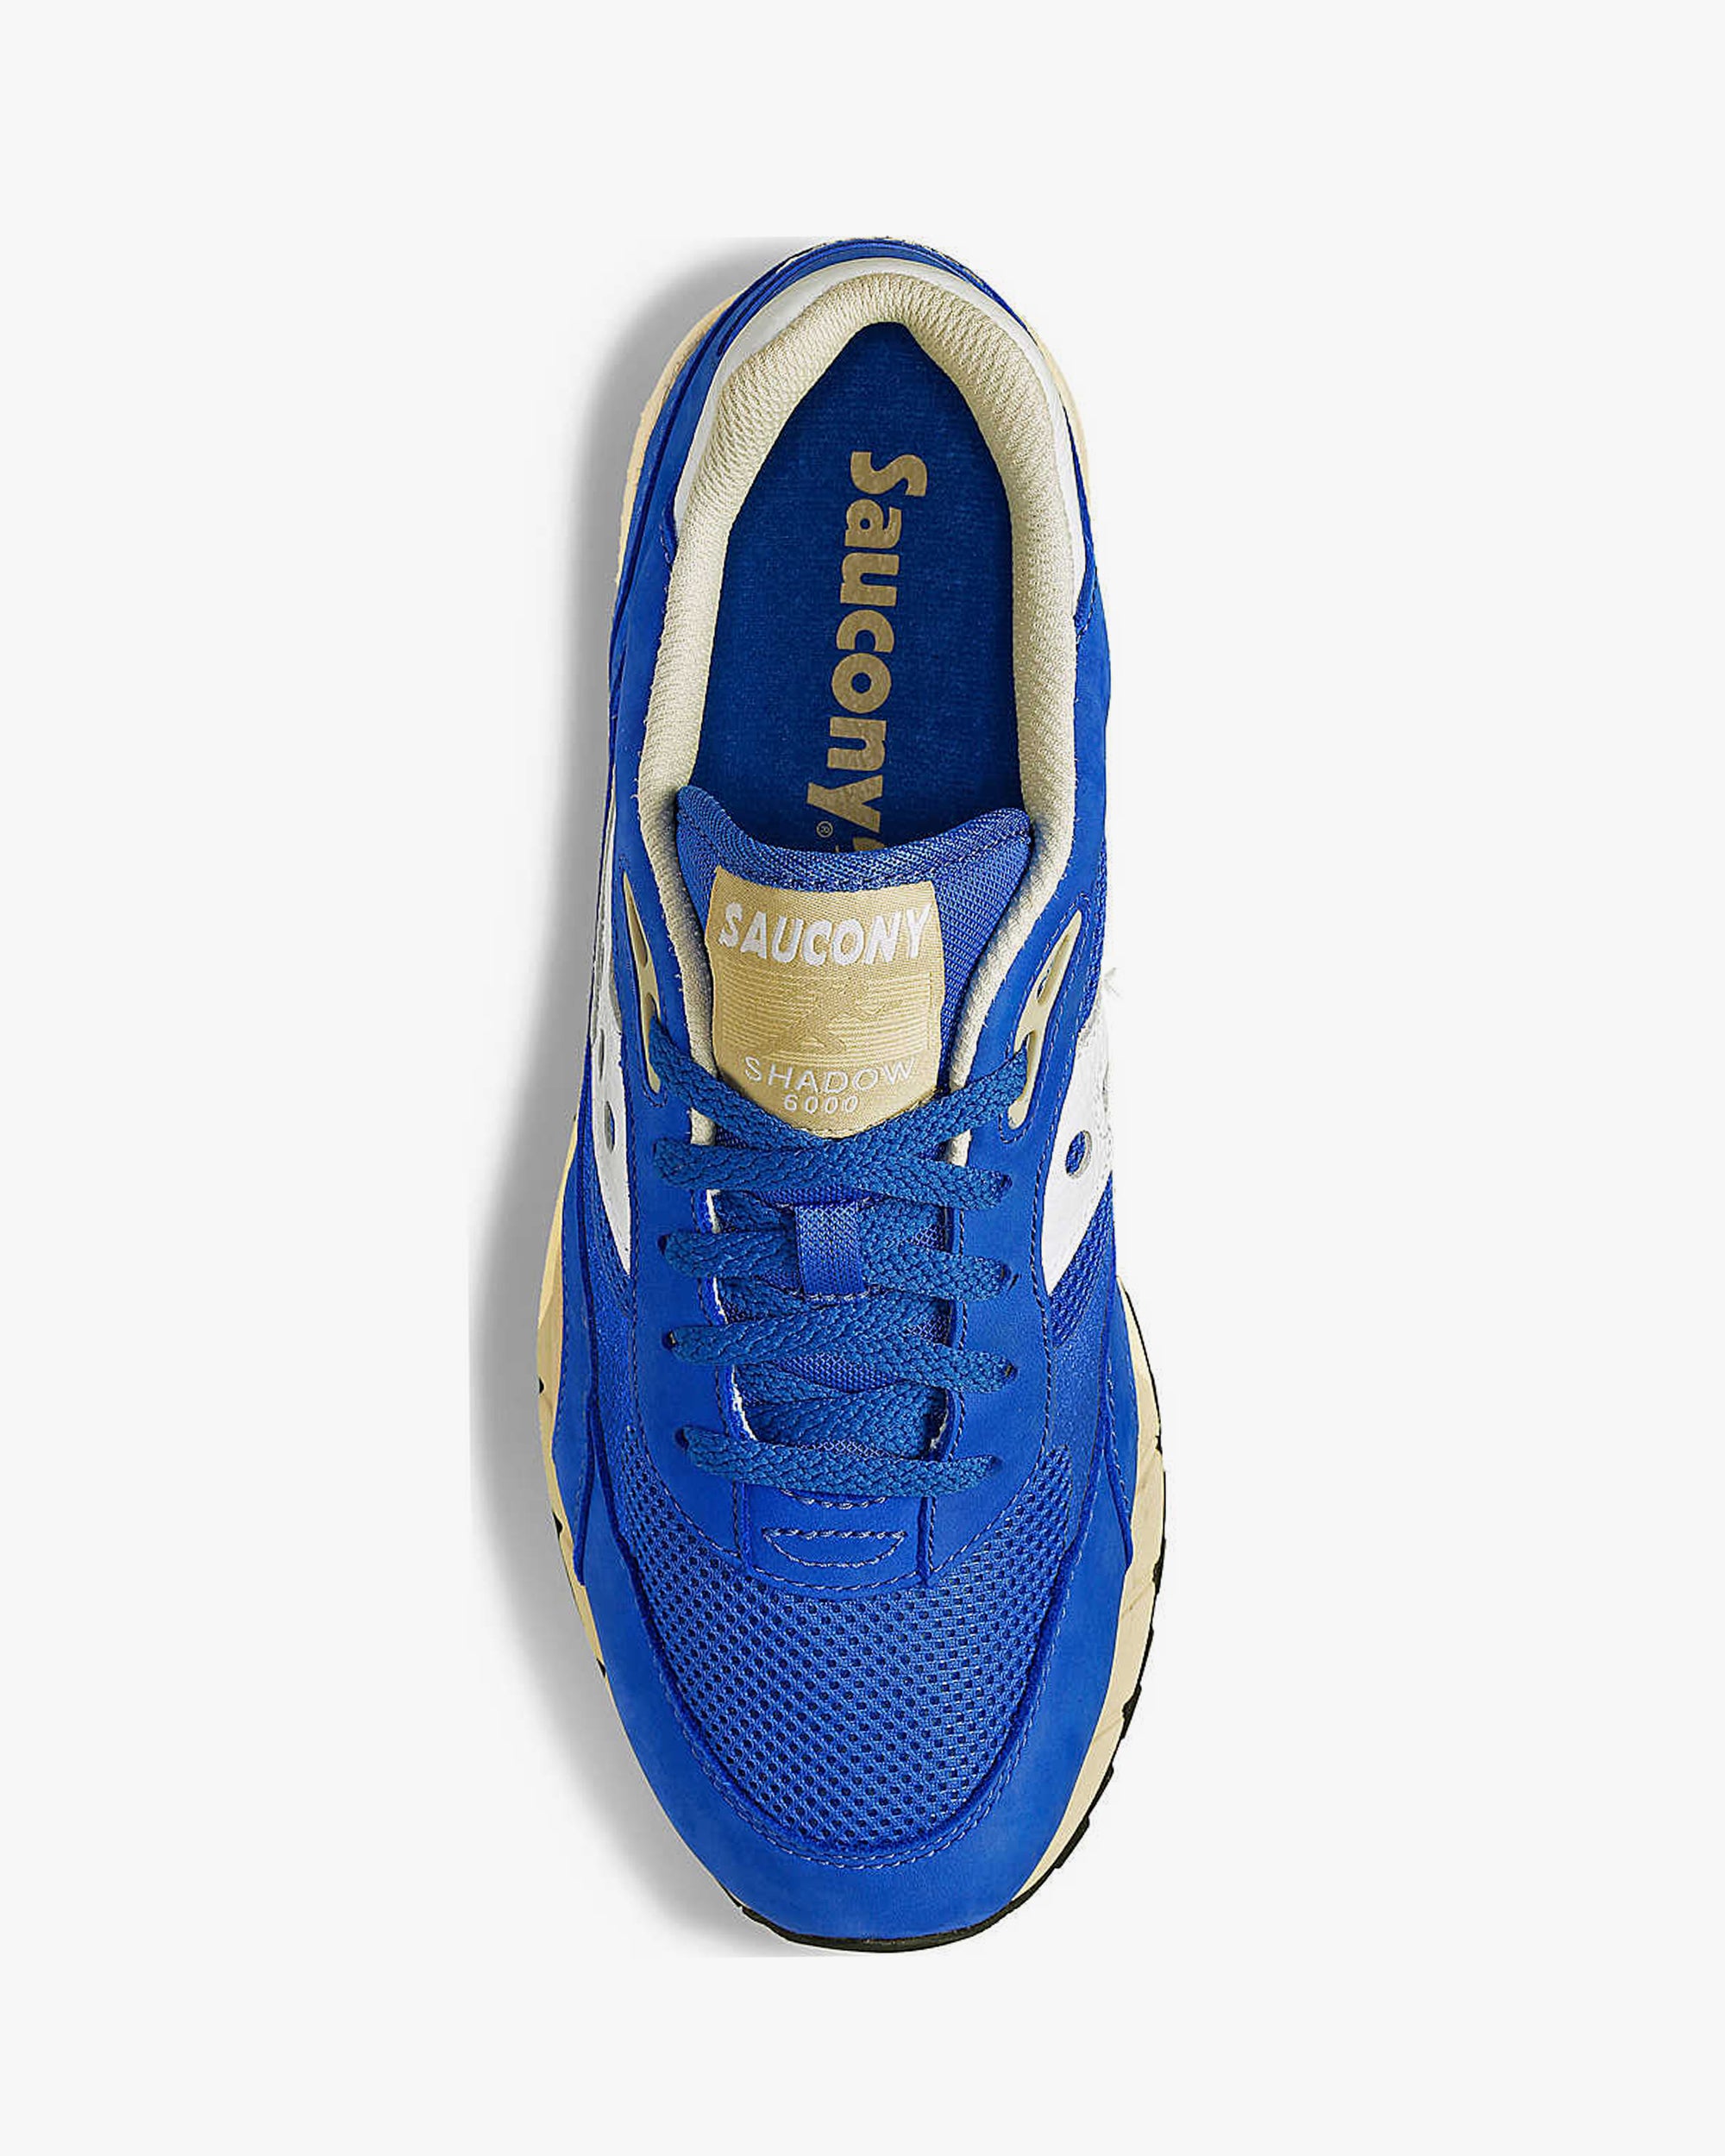 Saucony Shadow 6000 Sneakers – Clare V.